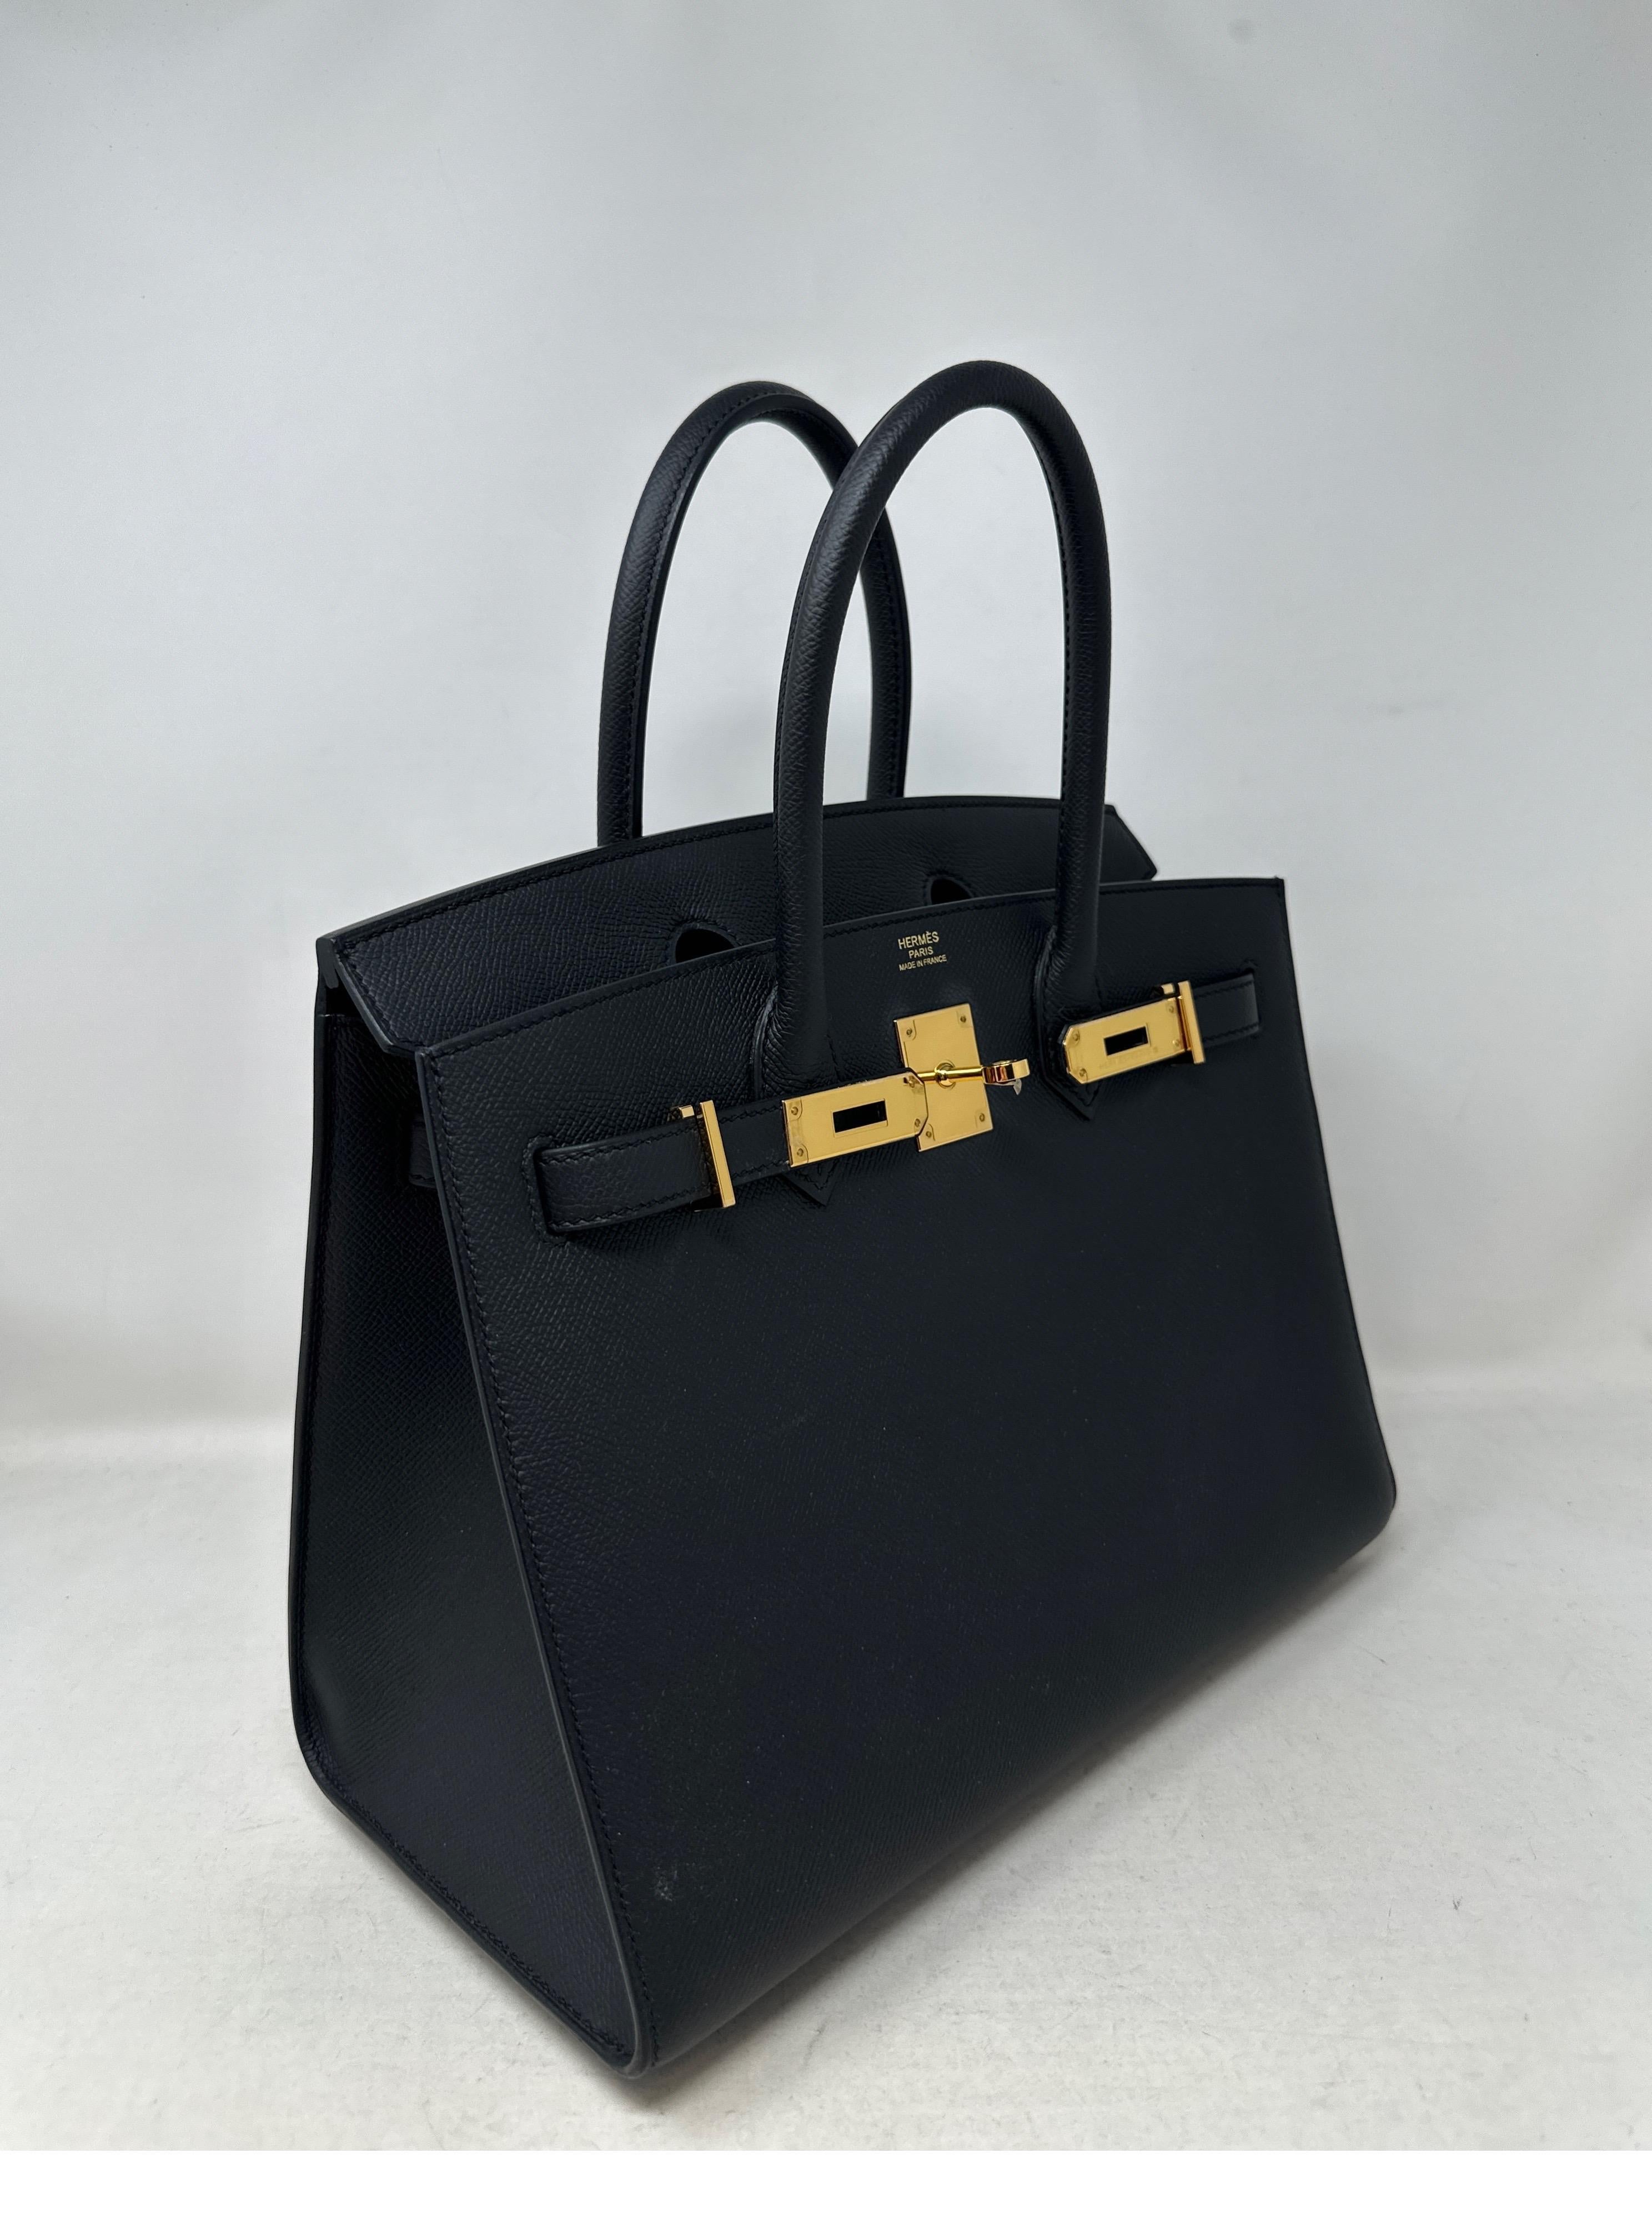 Hermes Black Birkin 30 Sellier Bag  In New Condition For Sale In Athens, GA